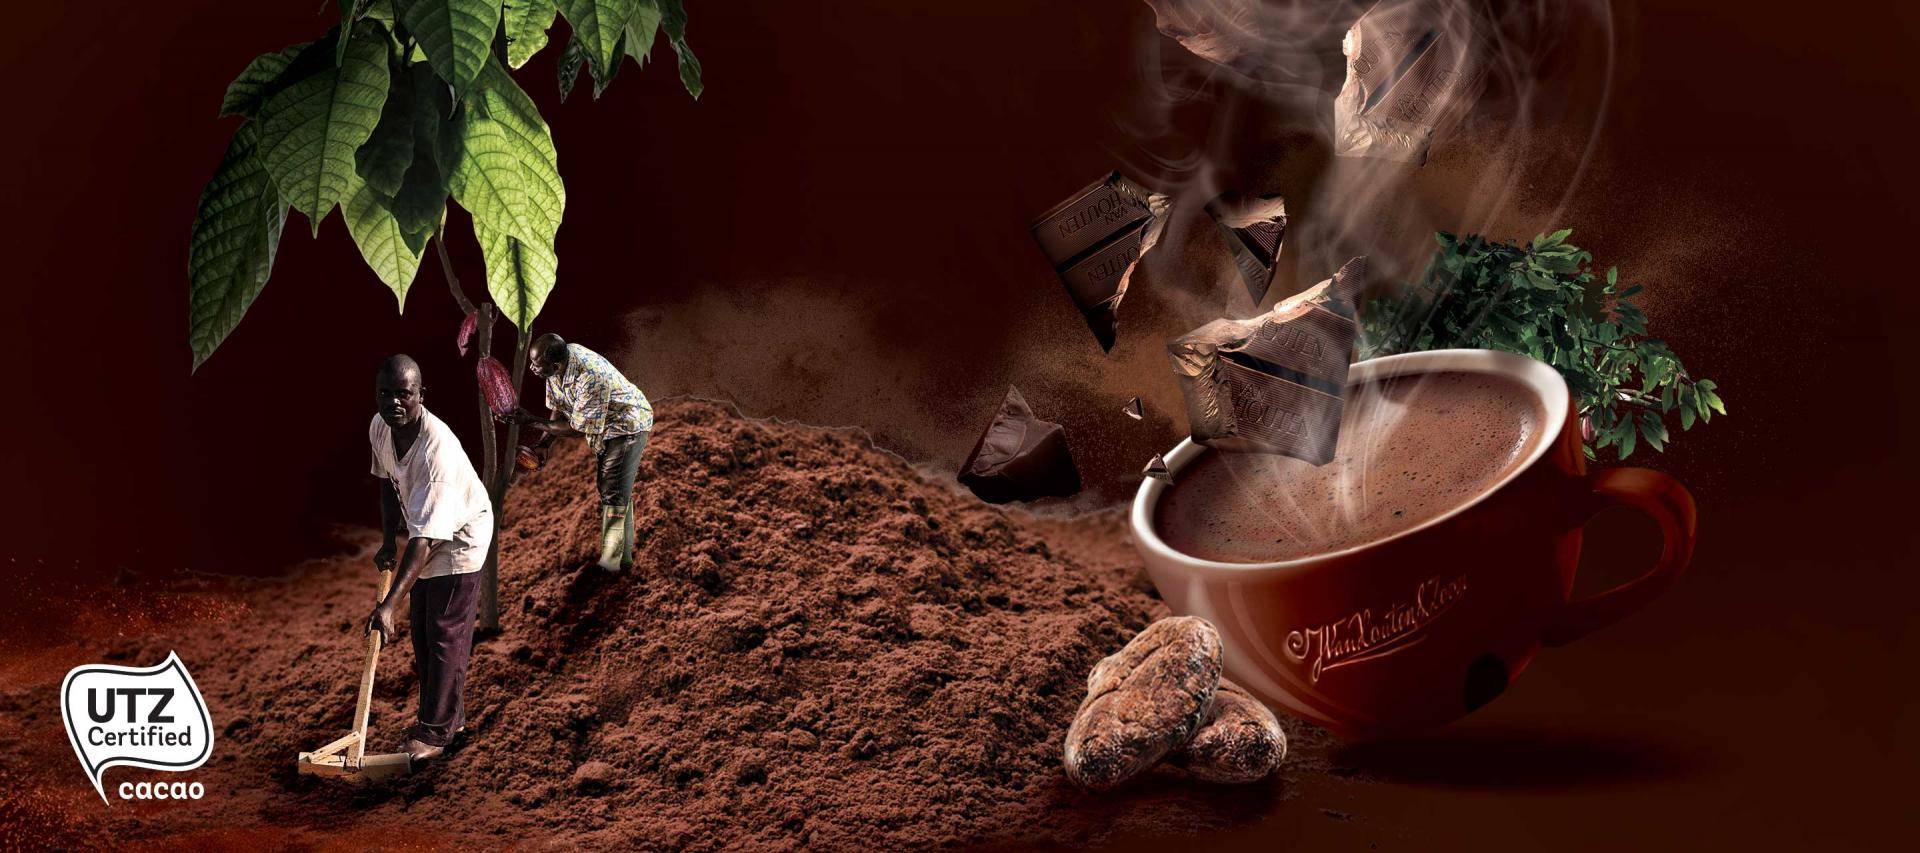 Making sustainable chocolate the norm